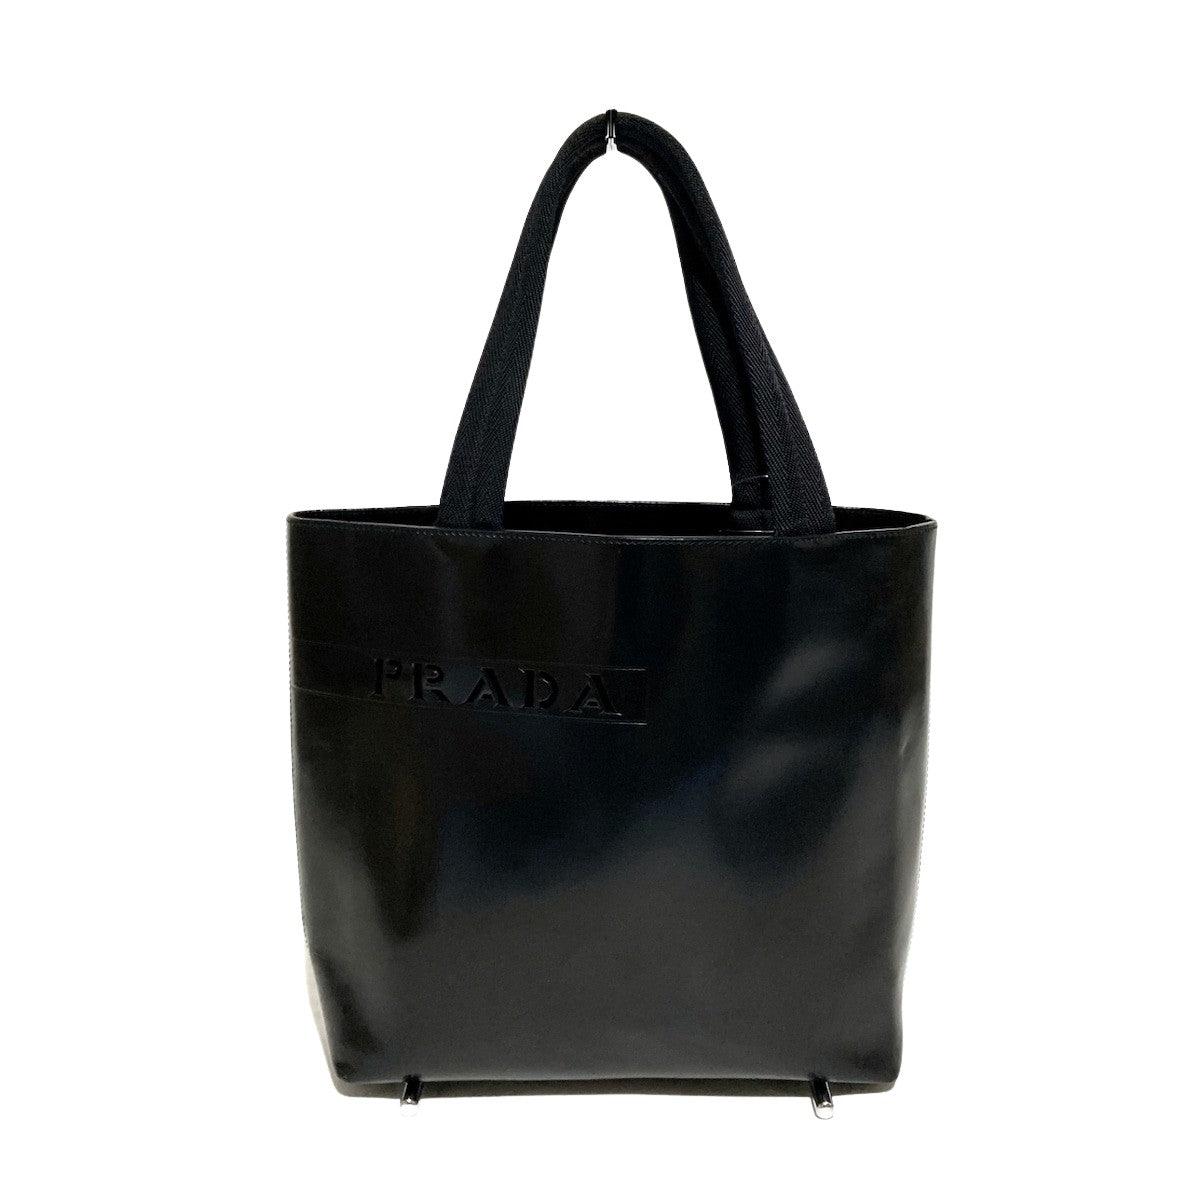 Prada Pre-owned Women's Leather Tote Bag - Black - One Size